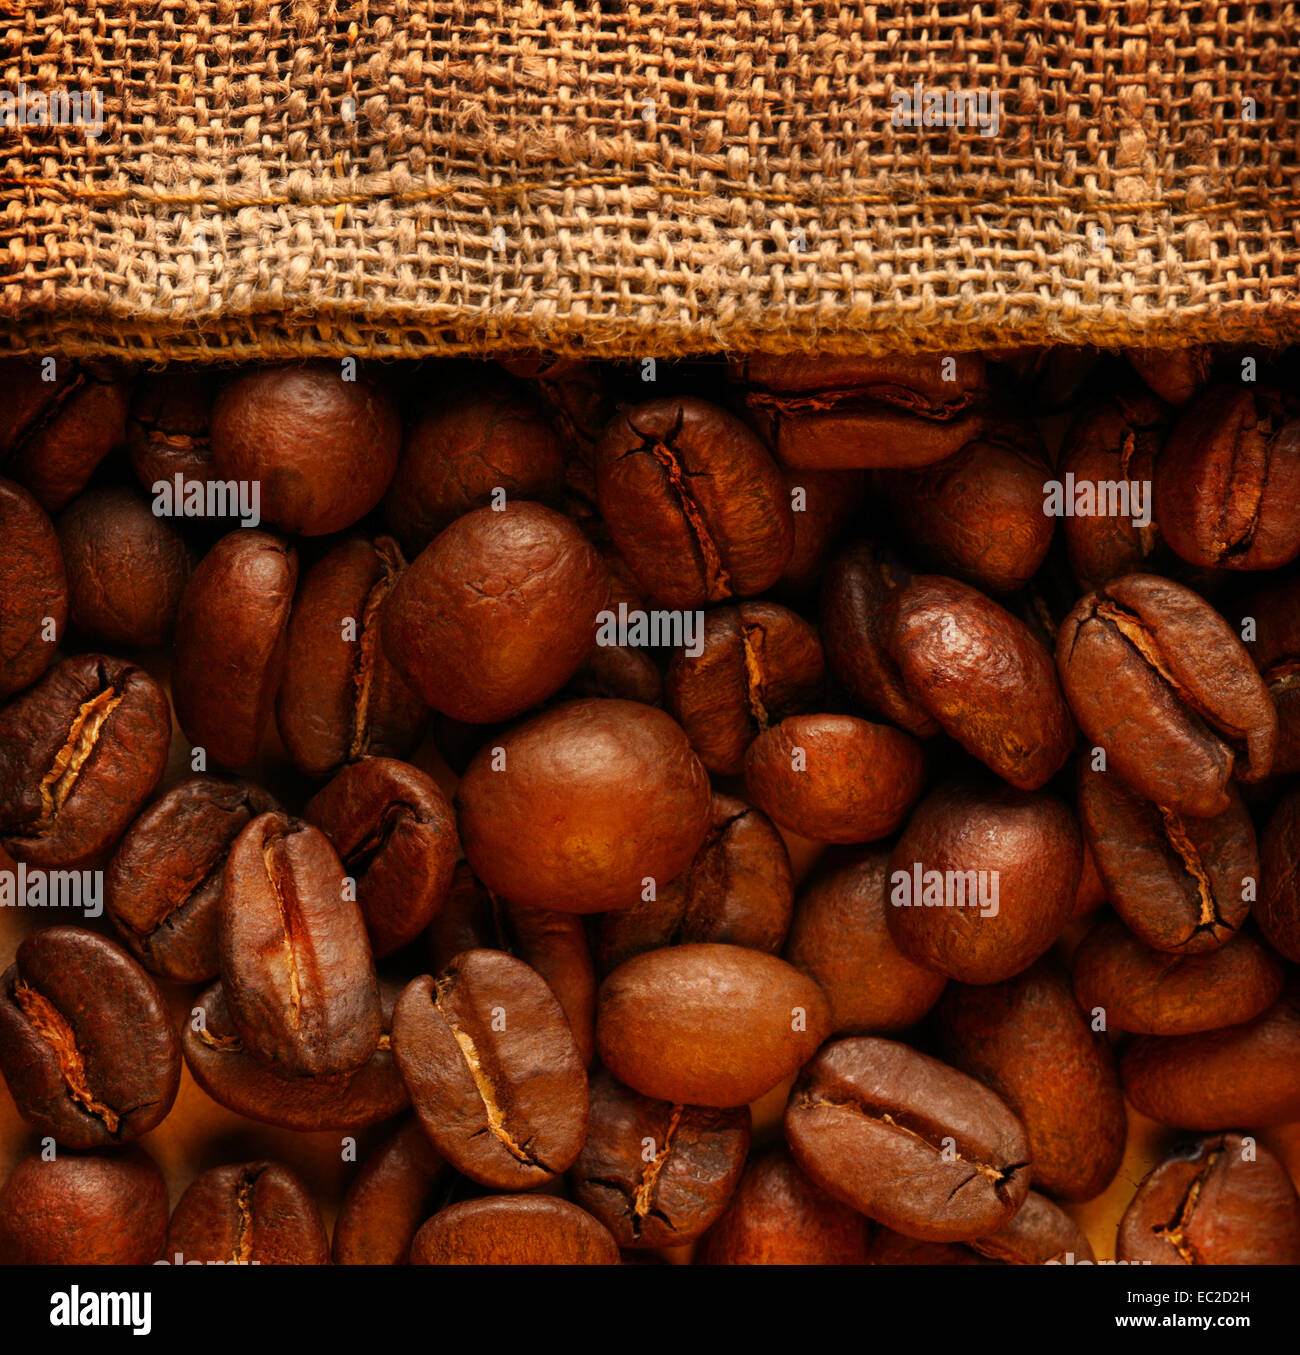 Brown coffee beans with sack Stock Photo